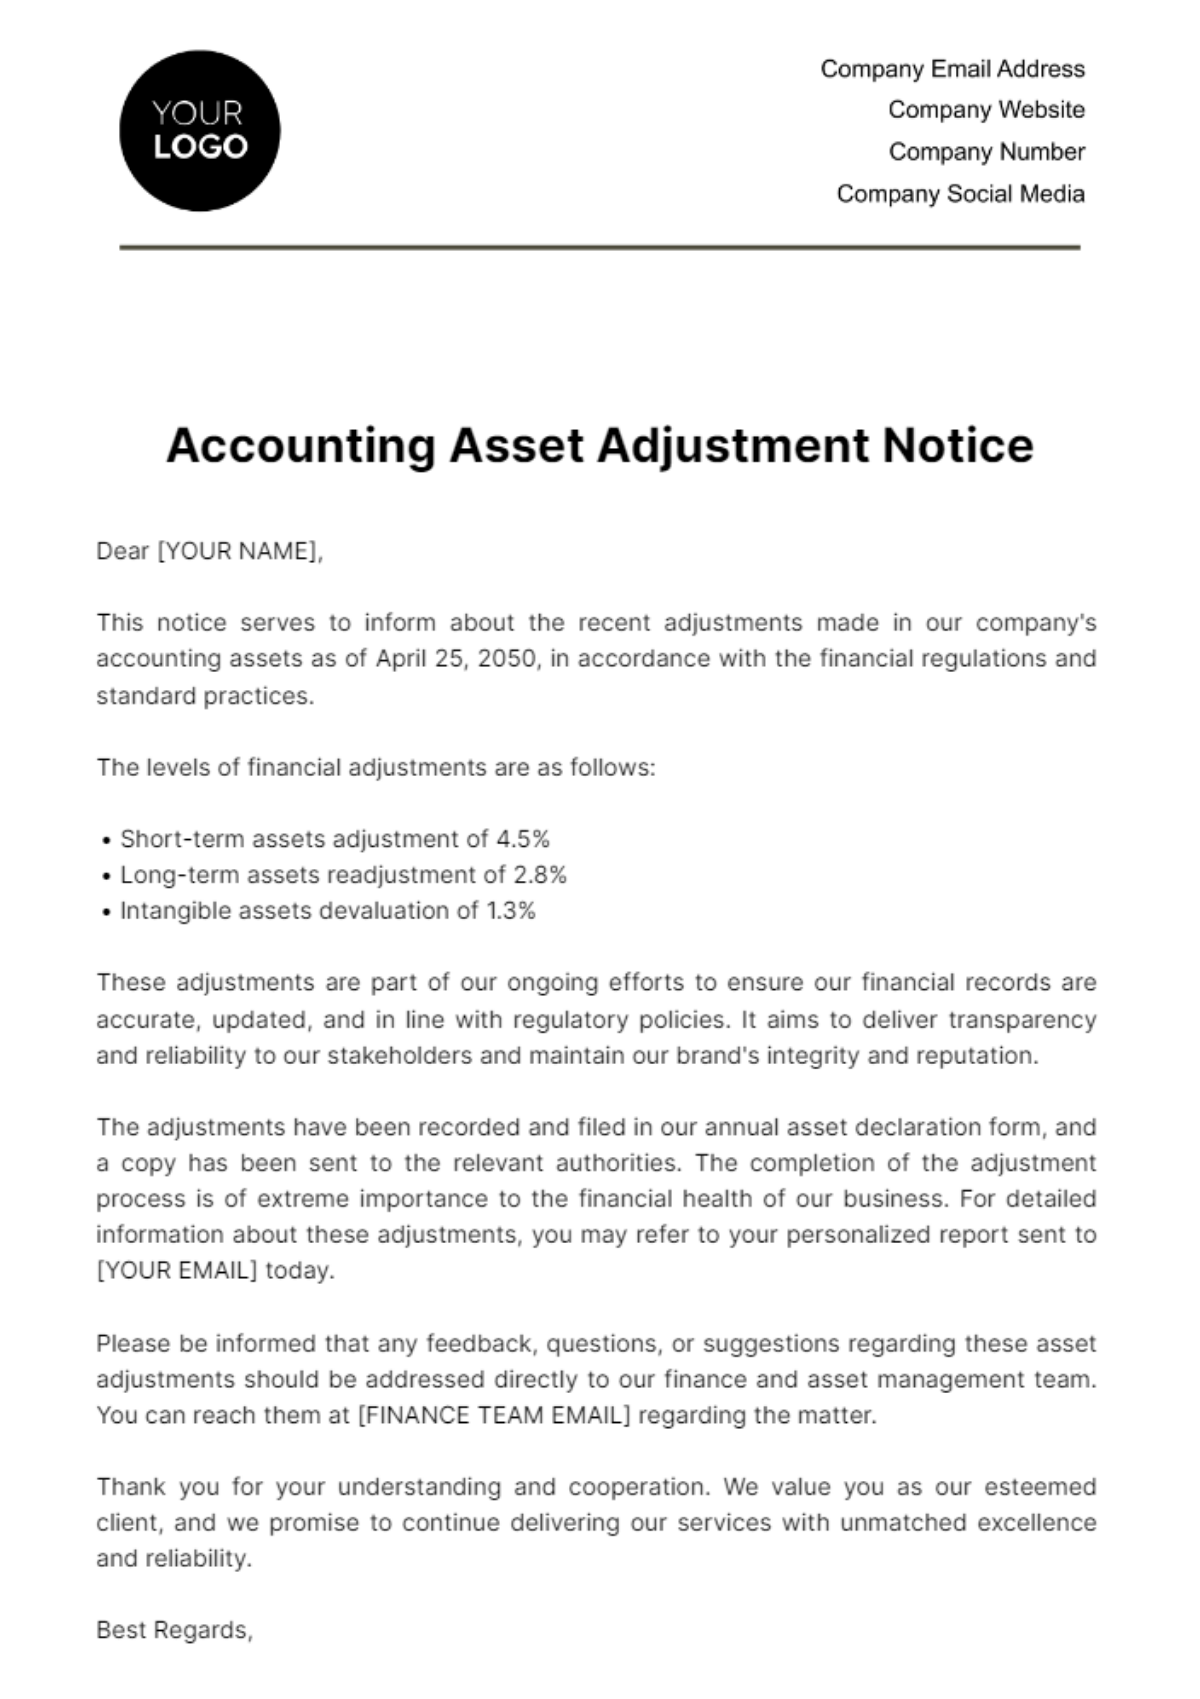 Free Accounting Asset Adjustment Notice Template